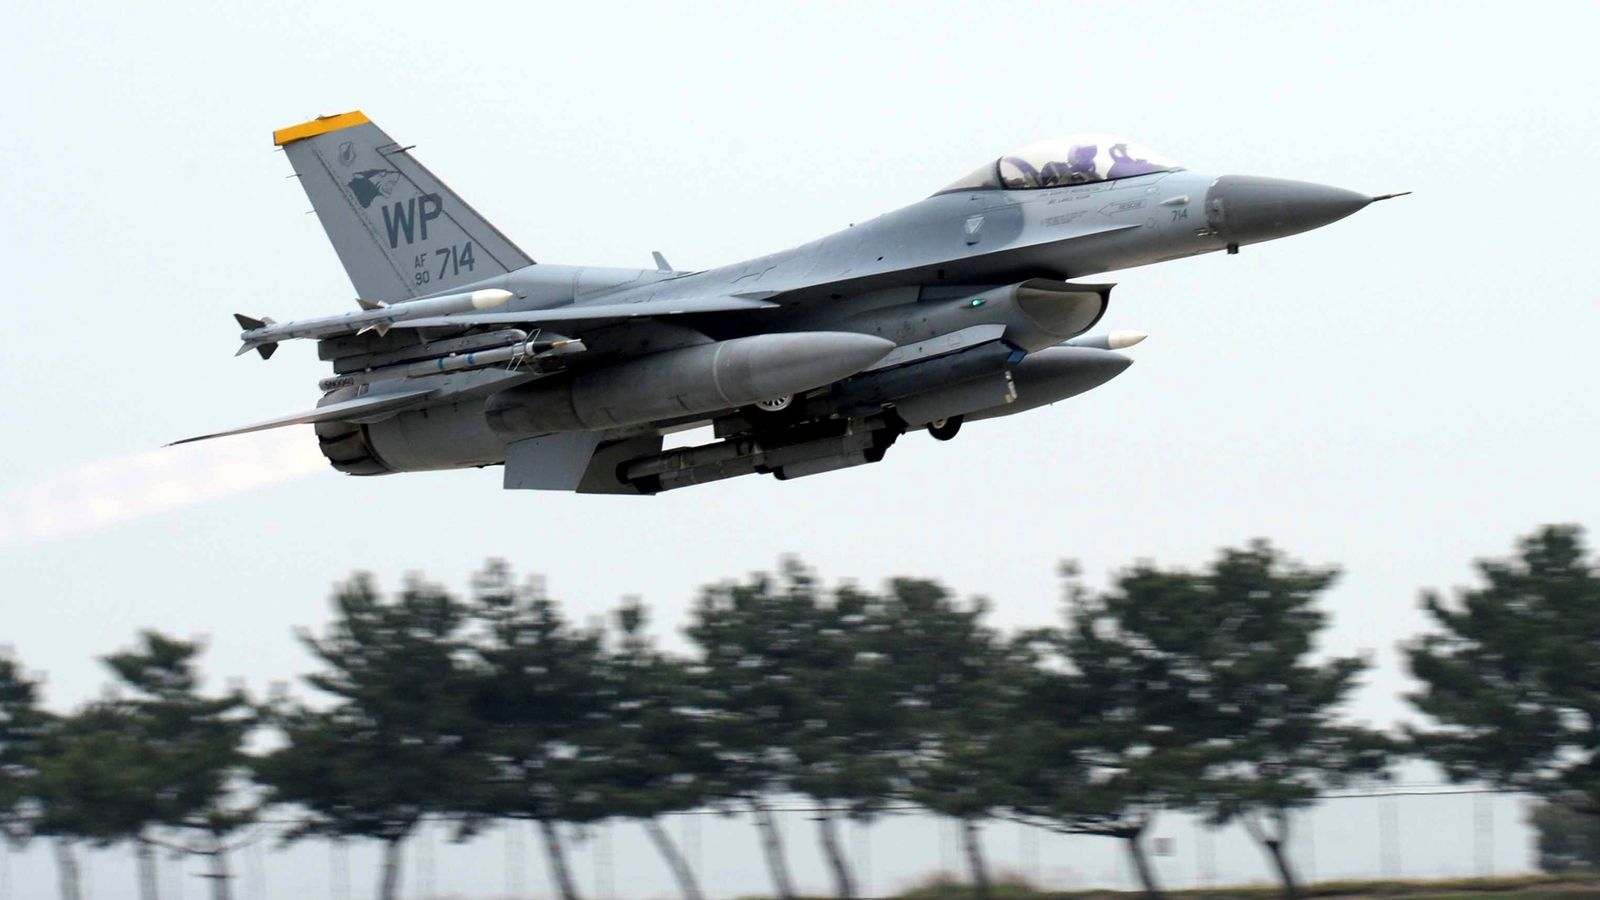 US pilot safely ejected before F-16 crashed into sea off South Korea, officials say